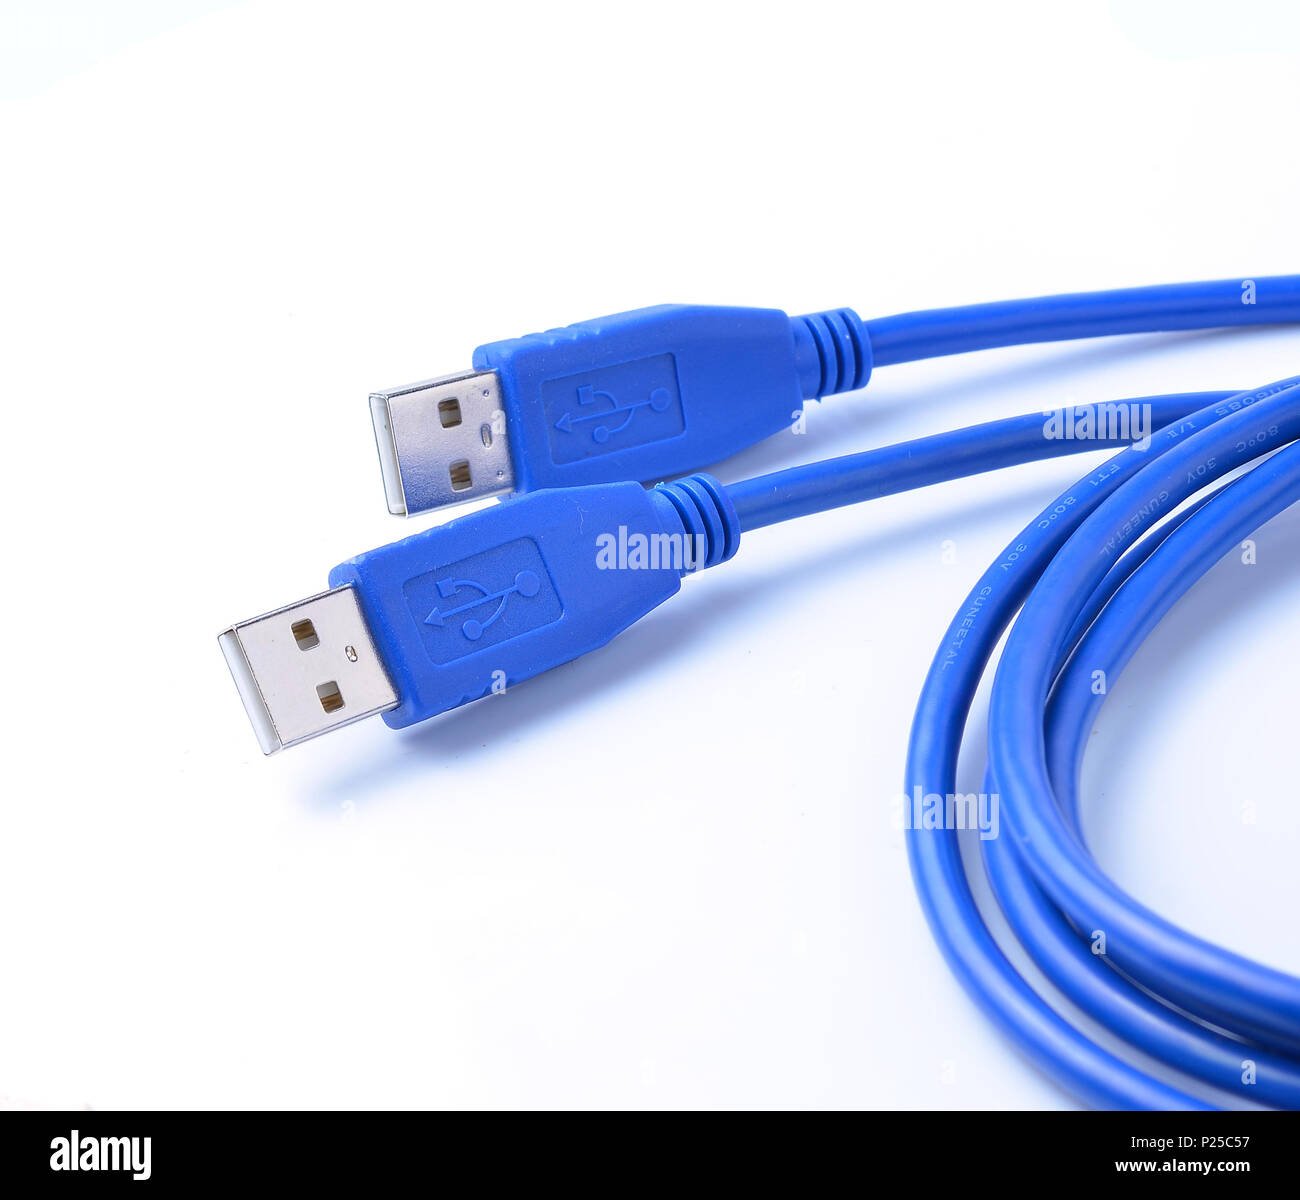 USB connector against white background Stock Photo